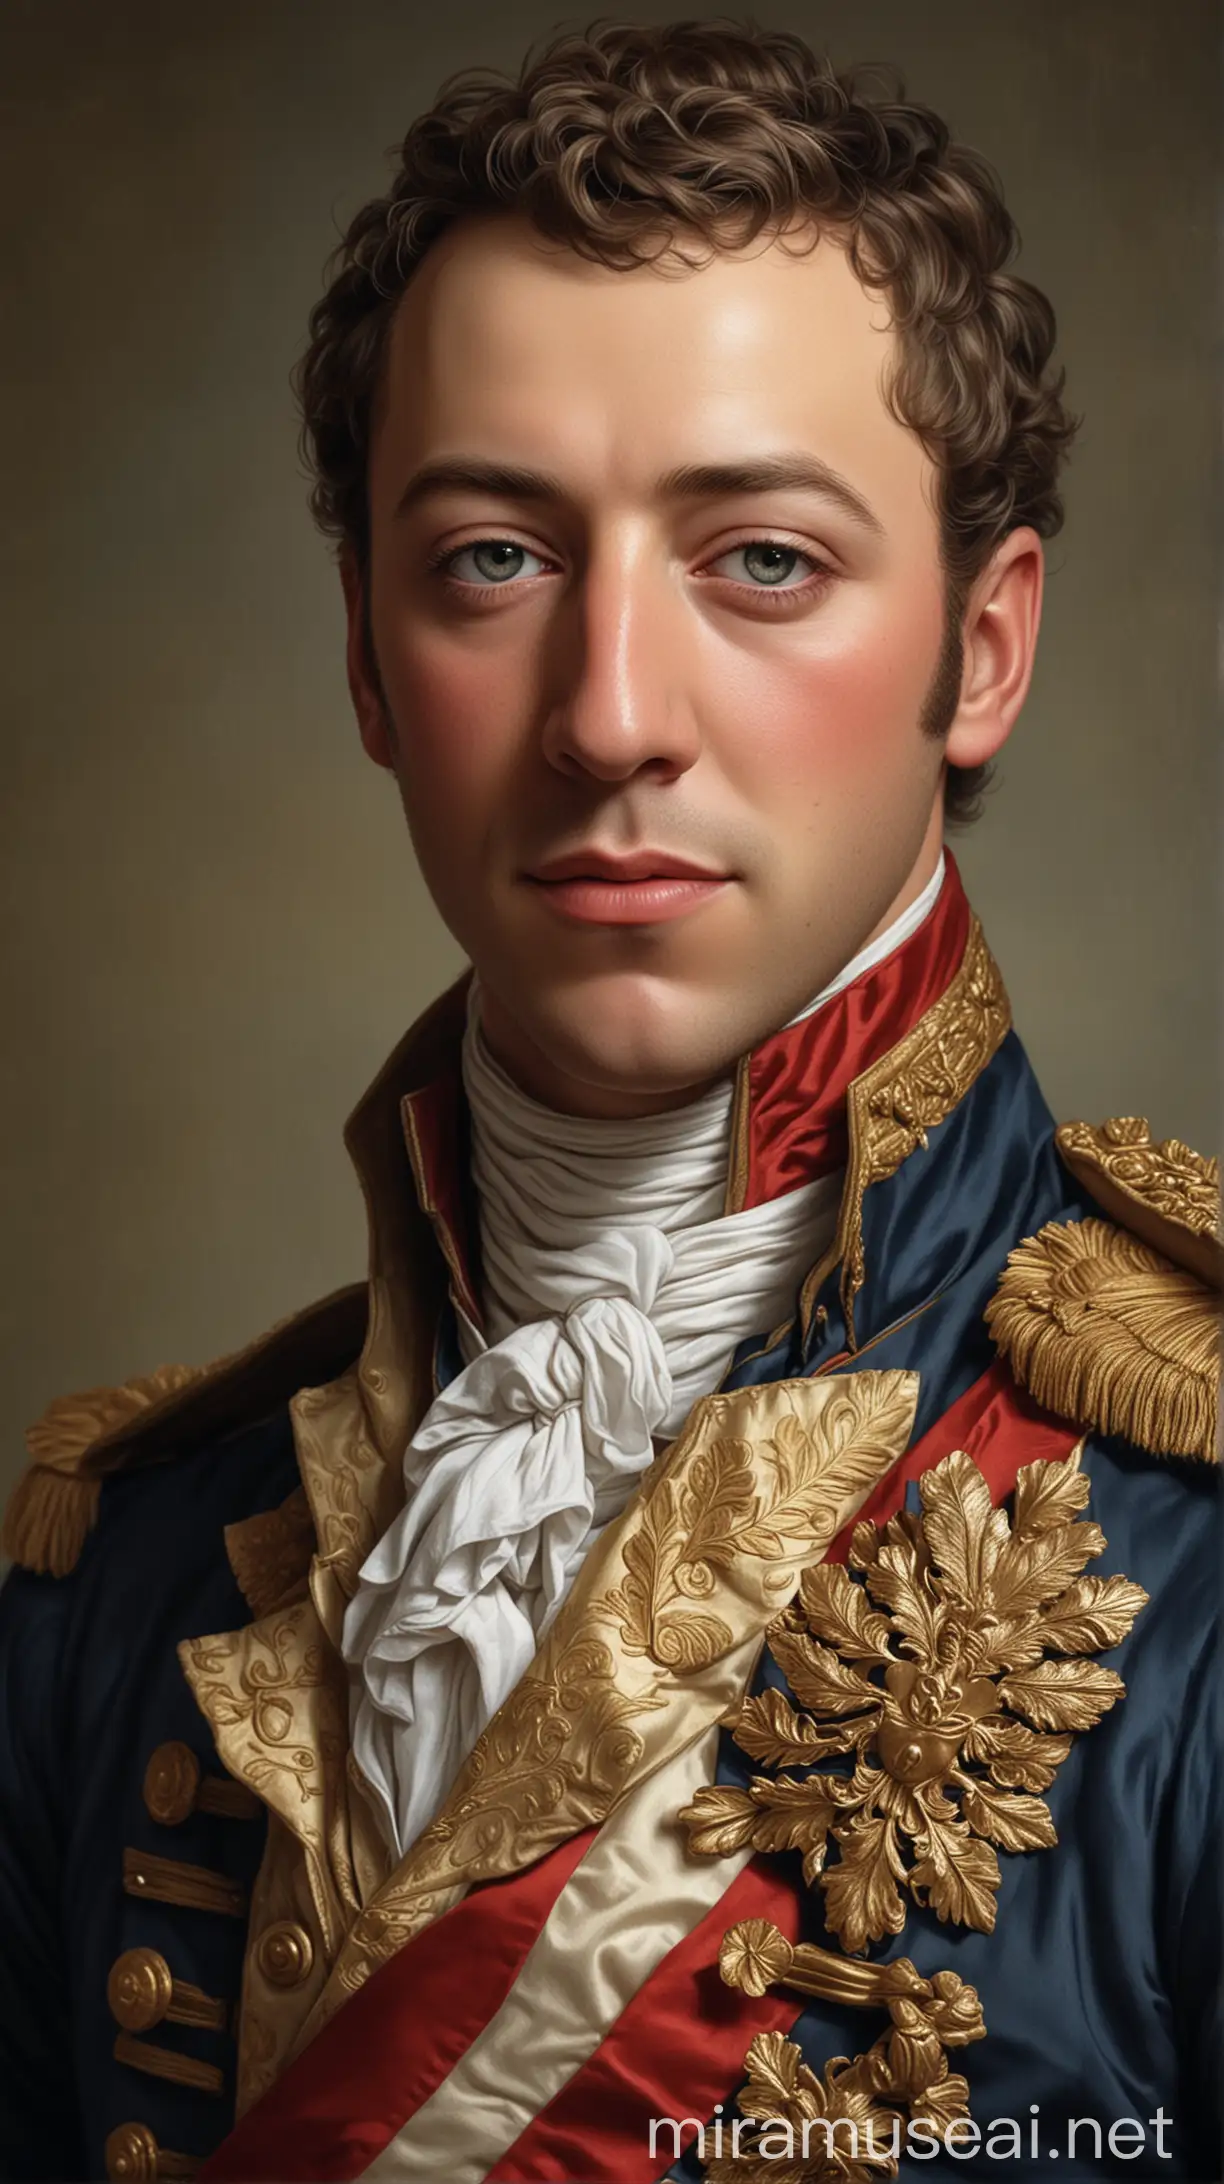 Young French Aristocrat Marquis de Lafayette in HyperRealistic Style